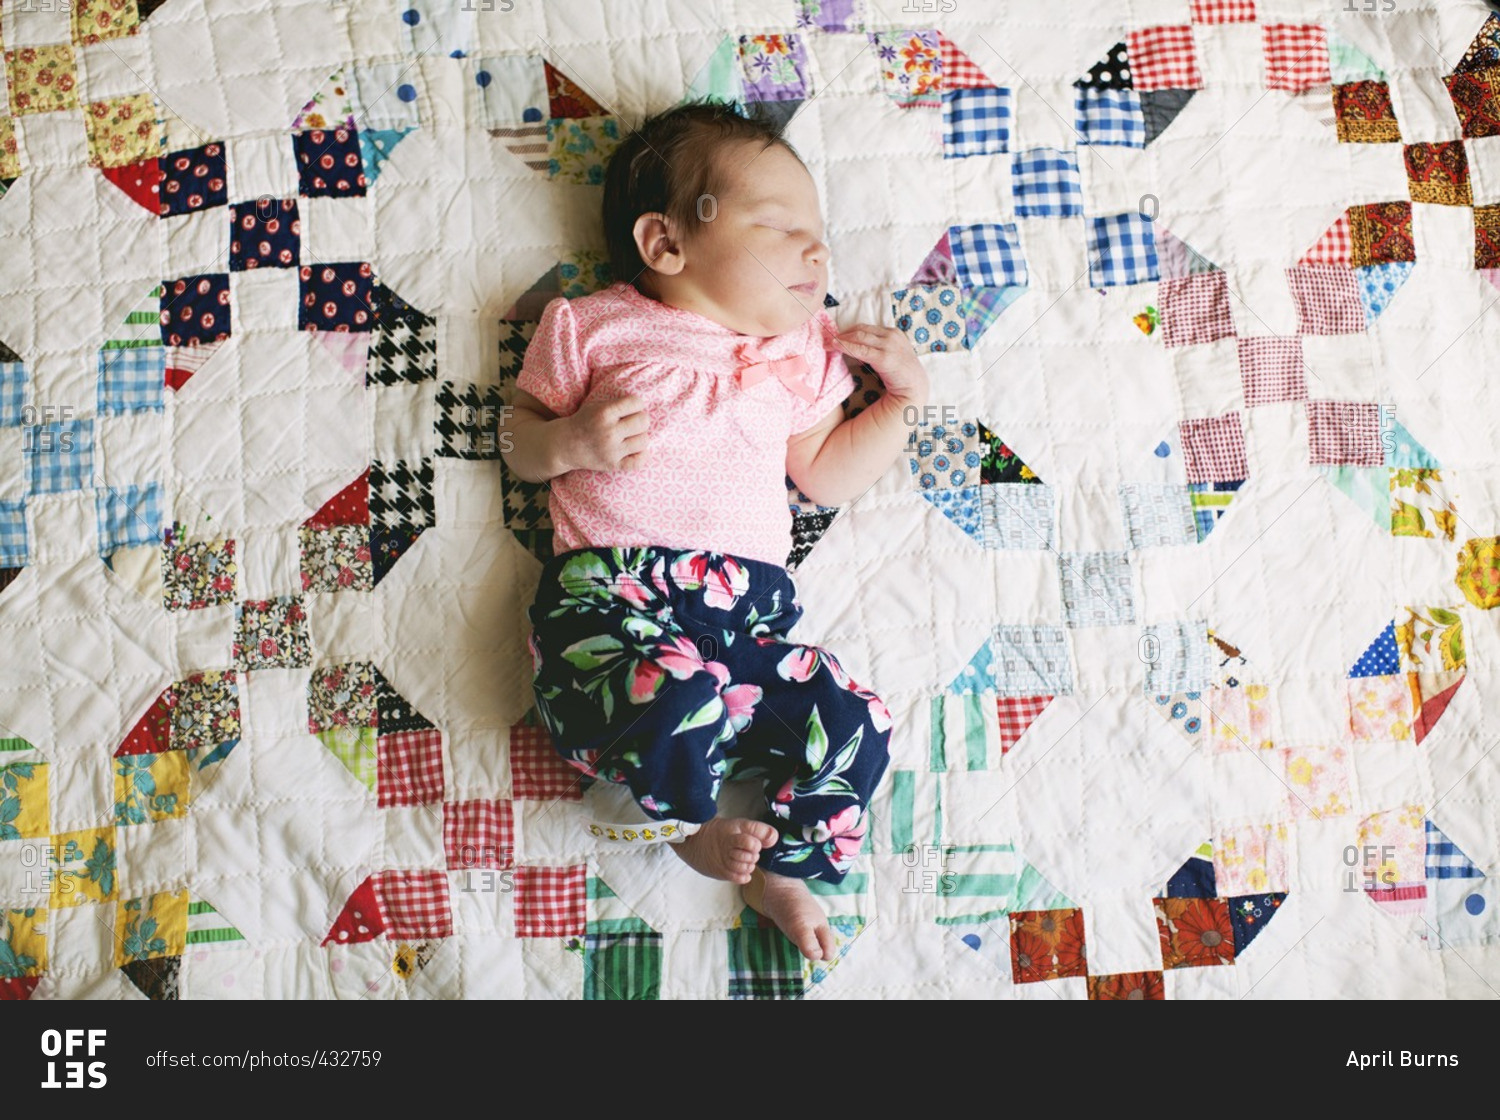 Sleeping baby lying on a colorful quilt